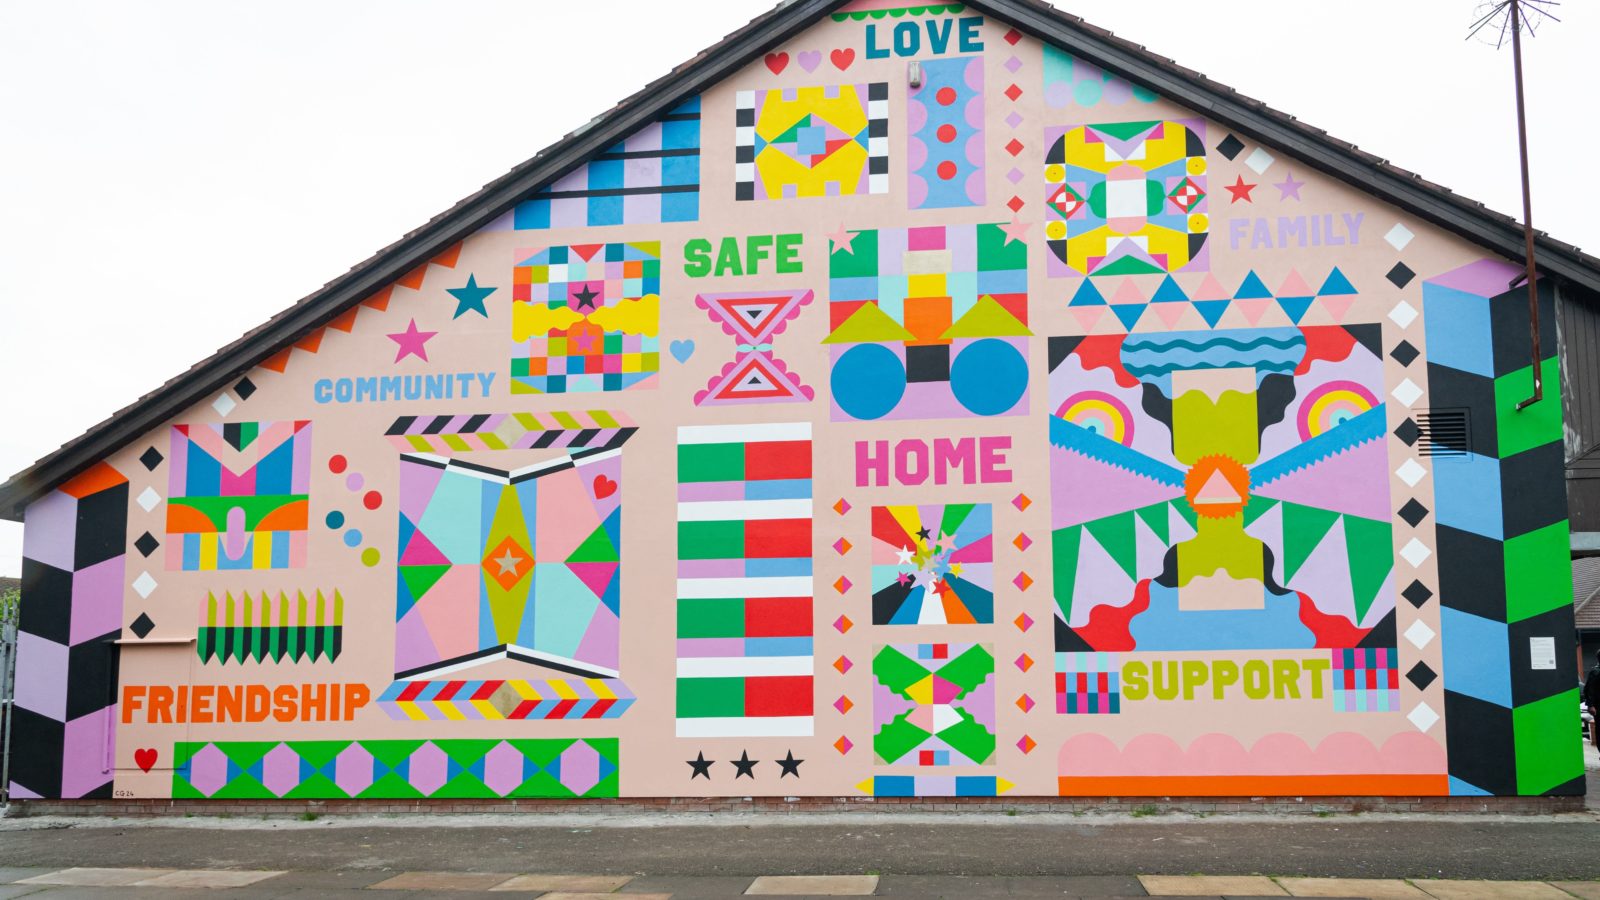 A photograph of the mural up front. The words ‘Friendship’, ‘Family’, ‘Home’, ‘Support’, ‘Love’, and ‘Safe’ can be read amongst abstract, geometric patterns in the colours, lilac, orange, red, blue, green, pink and yellow.